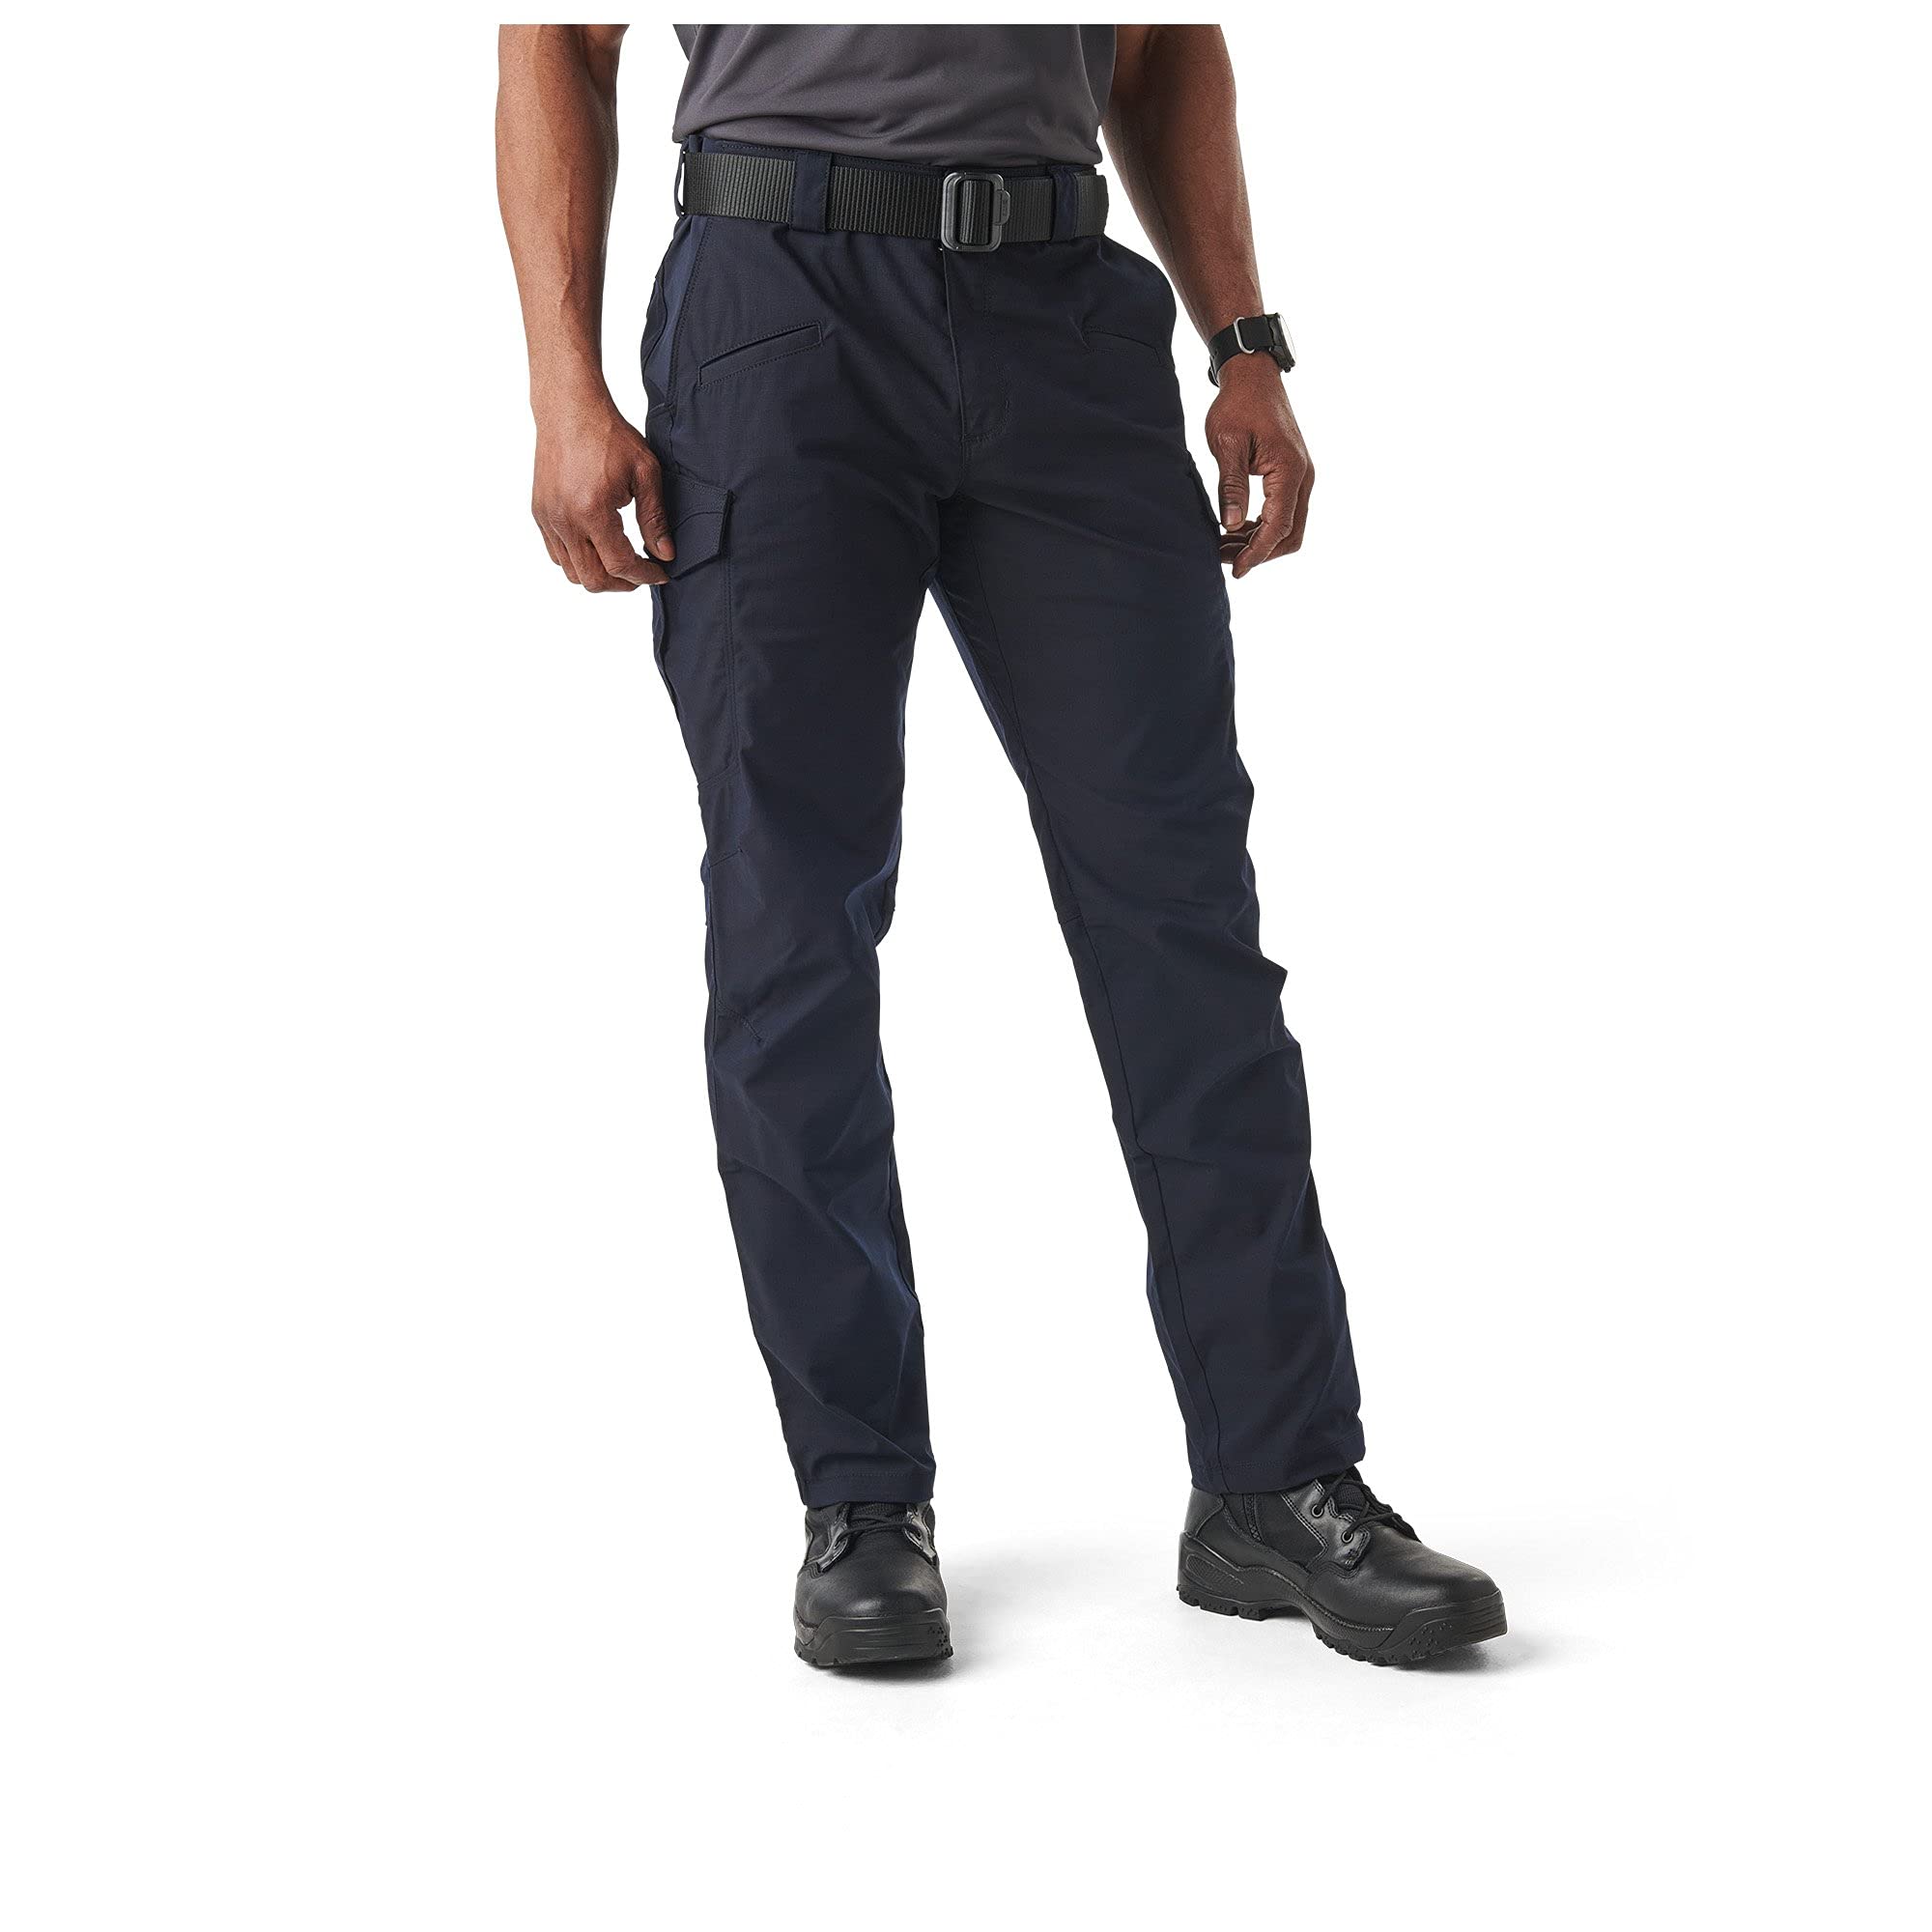 5.11 Tactical Trousers WAS £56.95